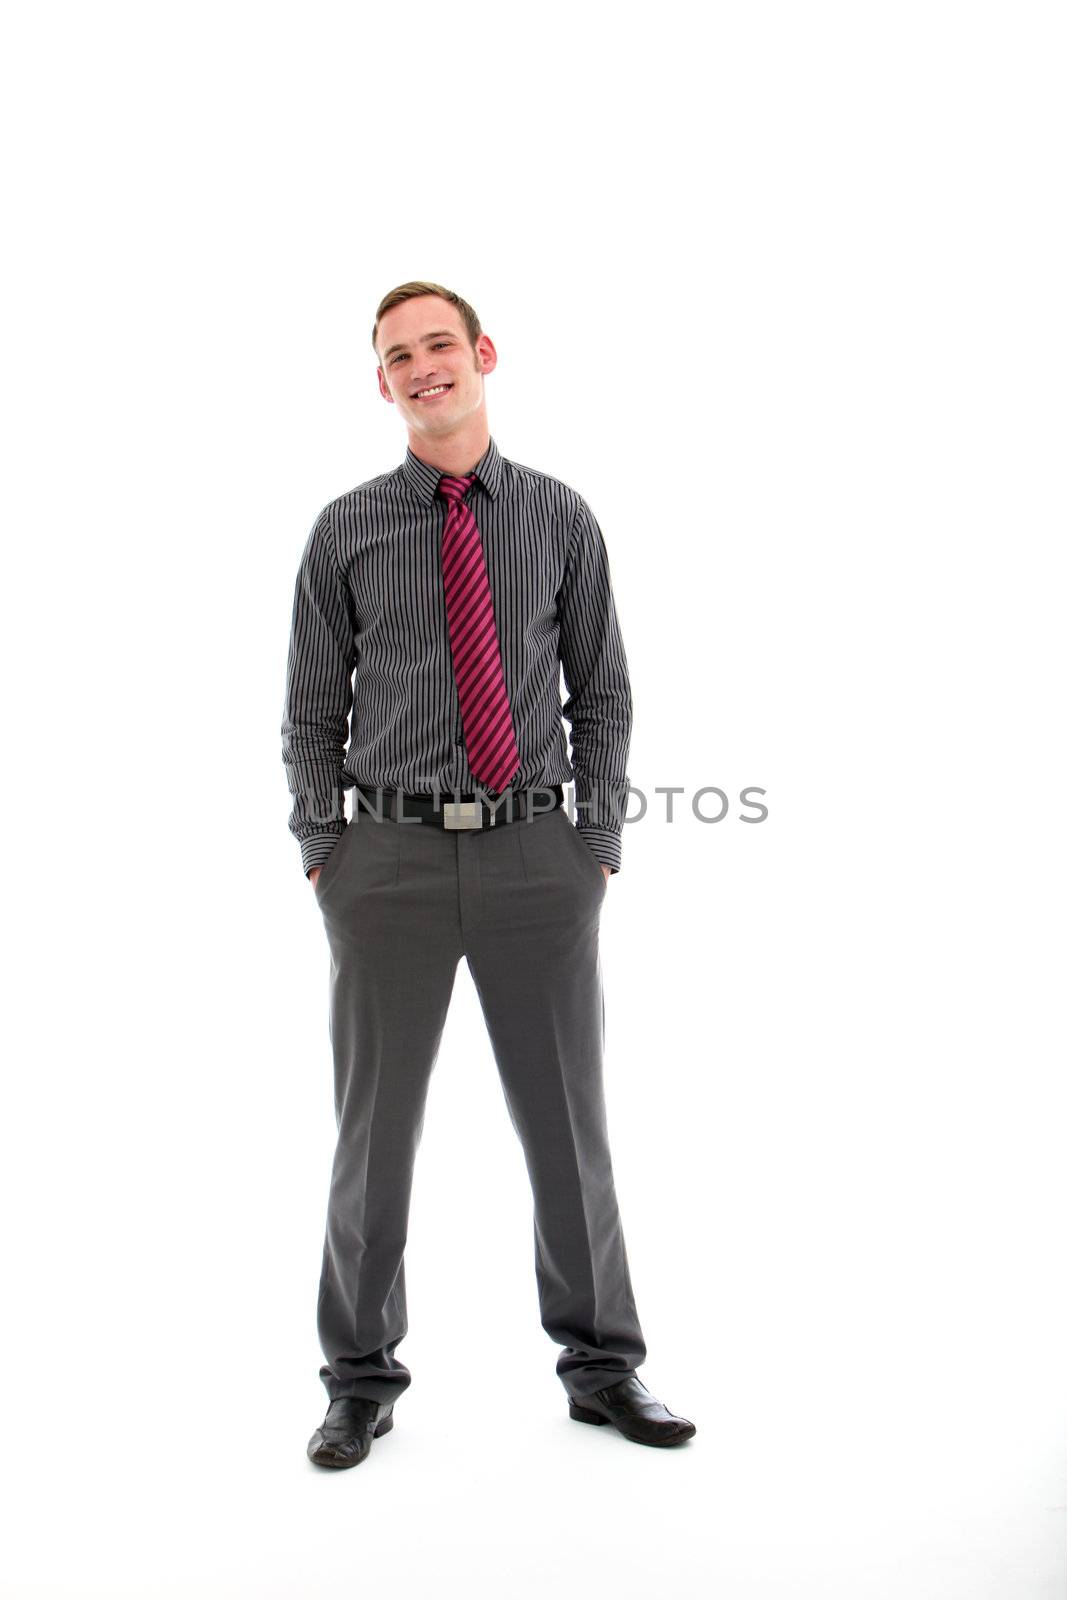 Confident casual smiling handsome businessman in stylish outfit posing full length facing camera with his hands in his pockets isolated on white